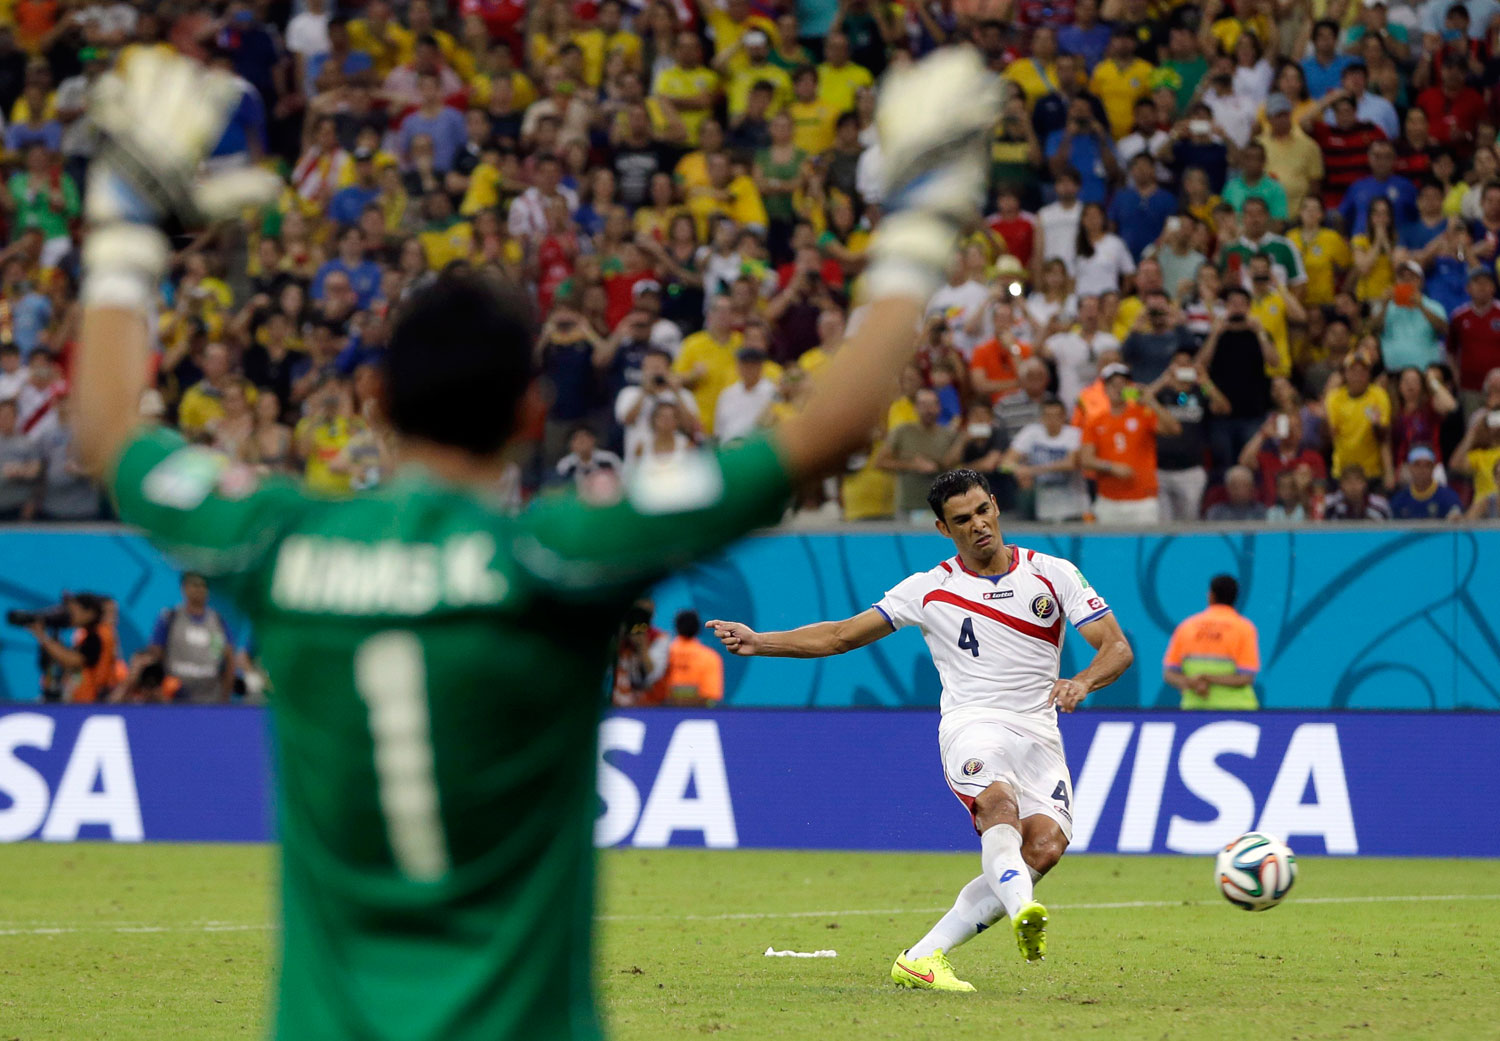 Costa Rica's goalkeeper Keylor Navas reacts as Michael Umana takes the winning kick in a penalty shootout at the Arena Pernambuco in Recife, Brazil on June 29, 2014.